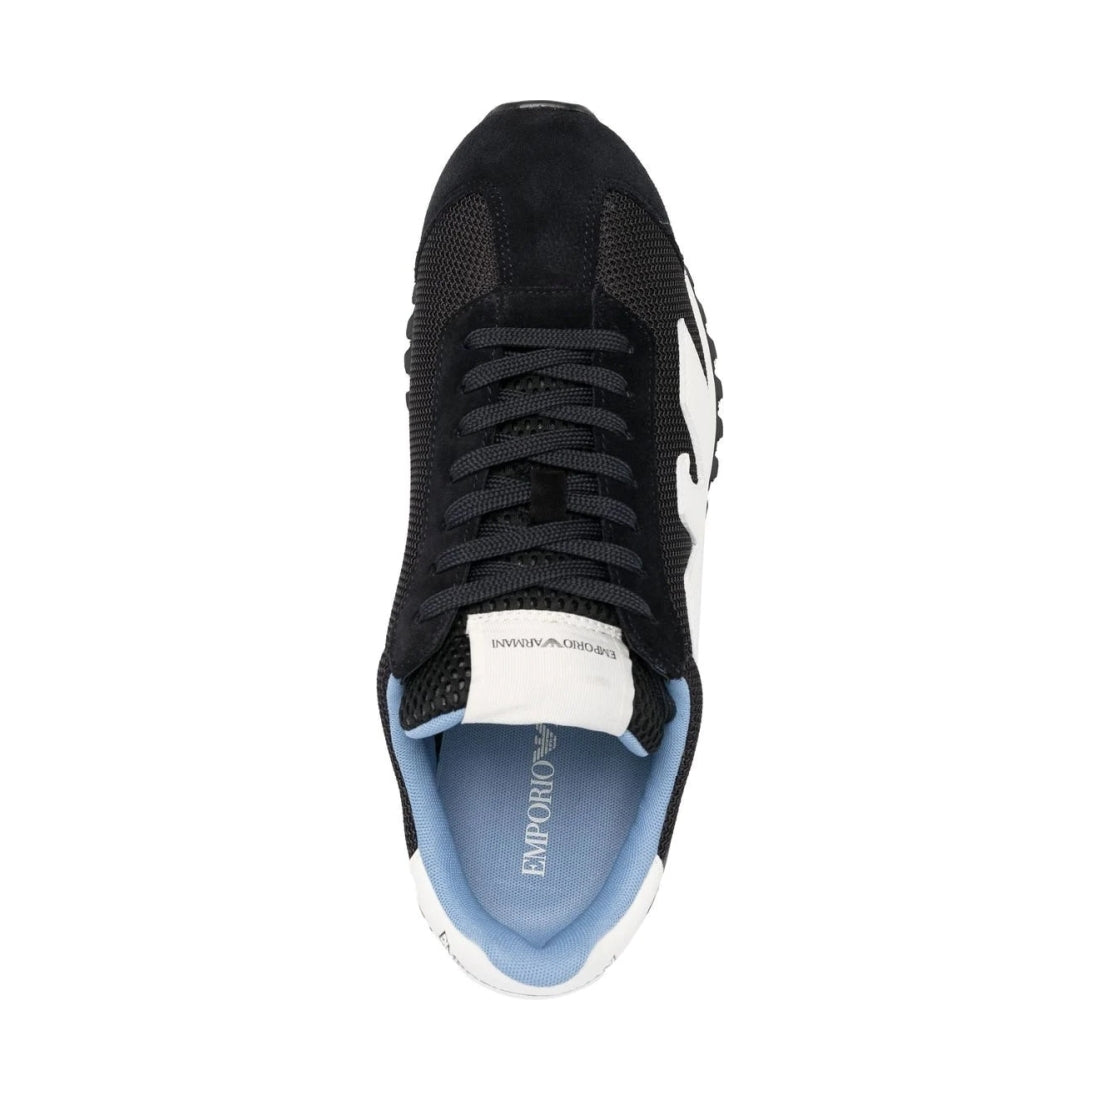 navy navy off white casual sneaker